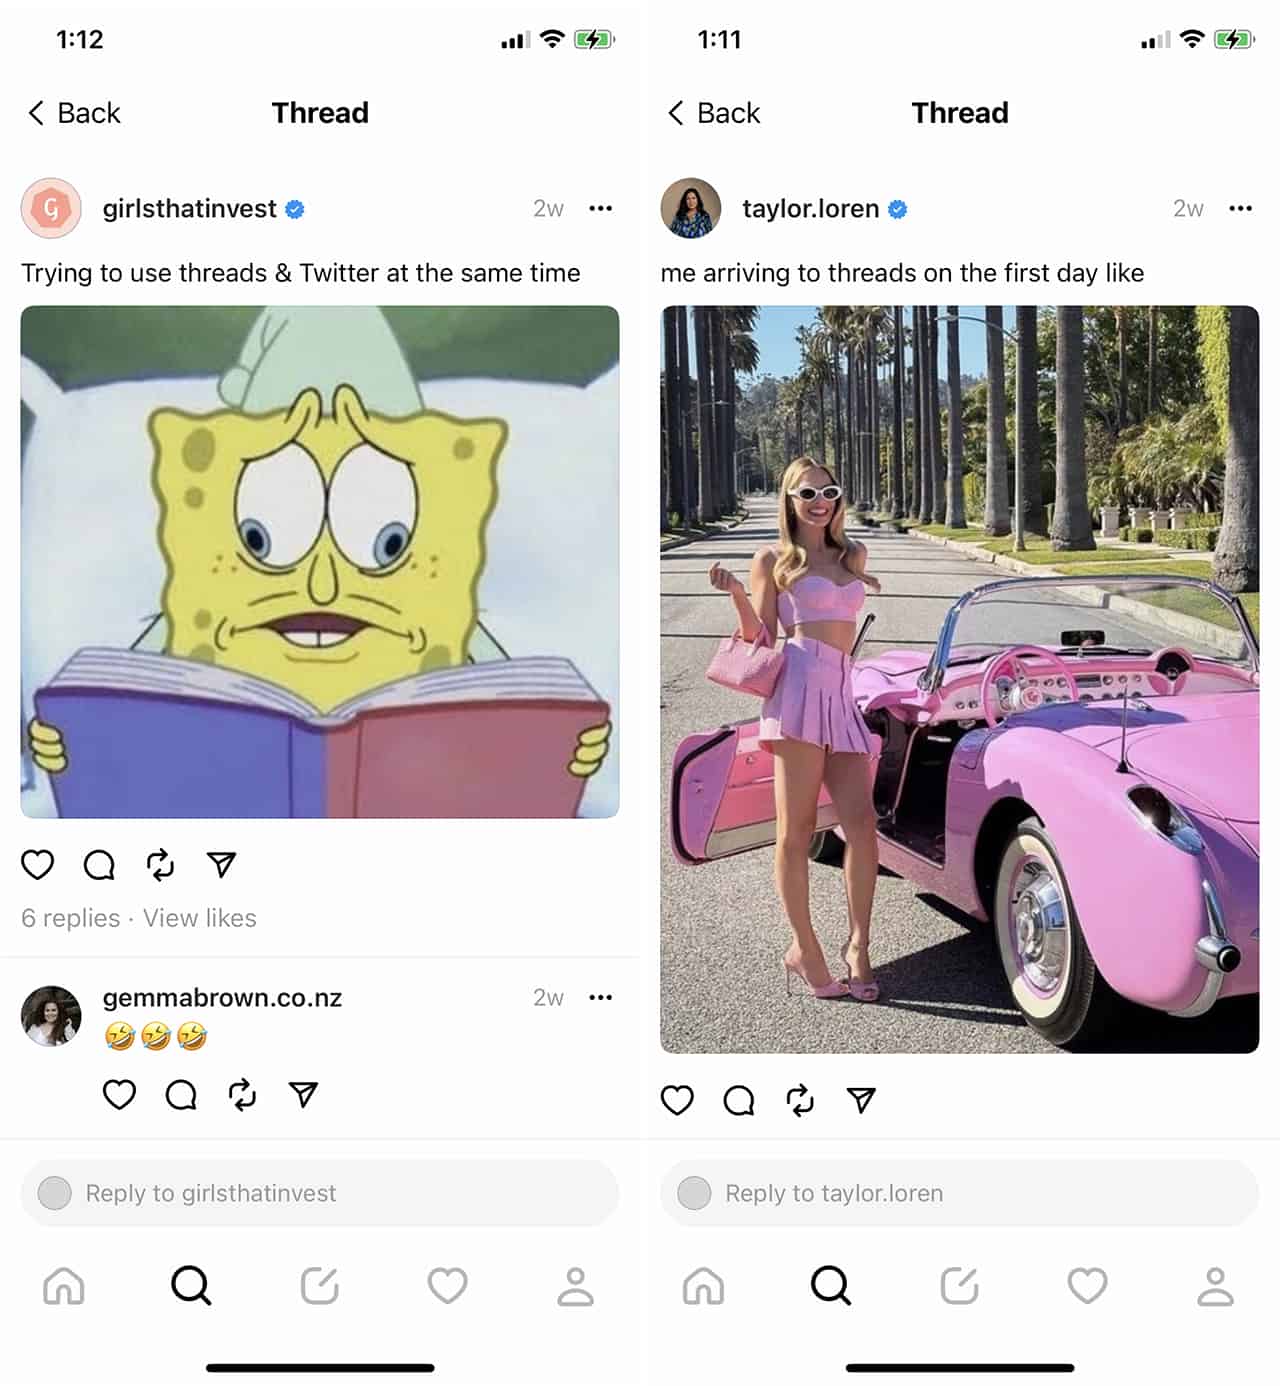 how to get more threads app followers instagram post memes
